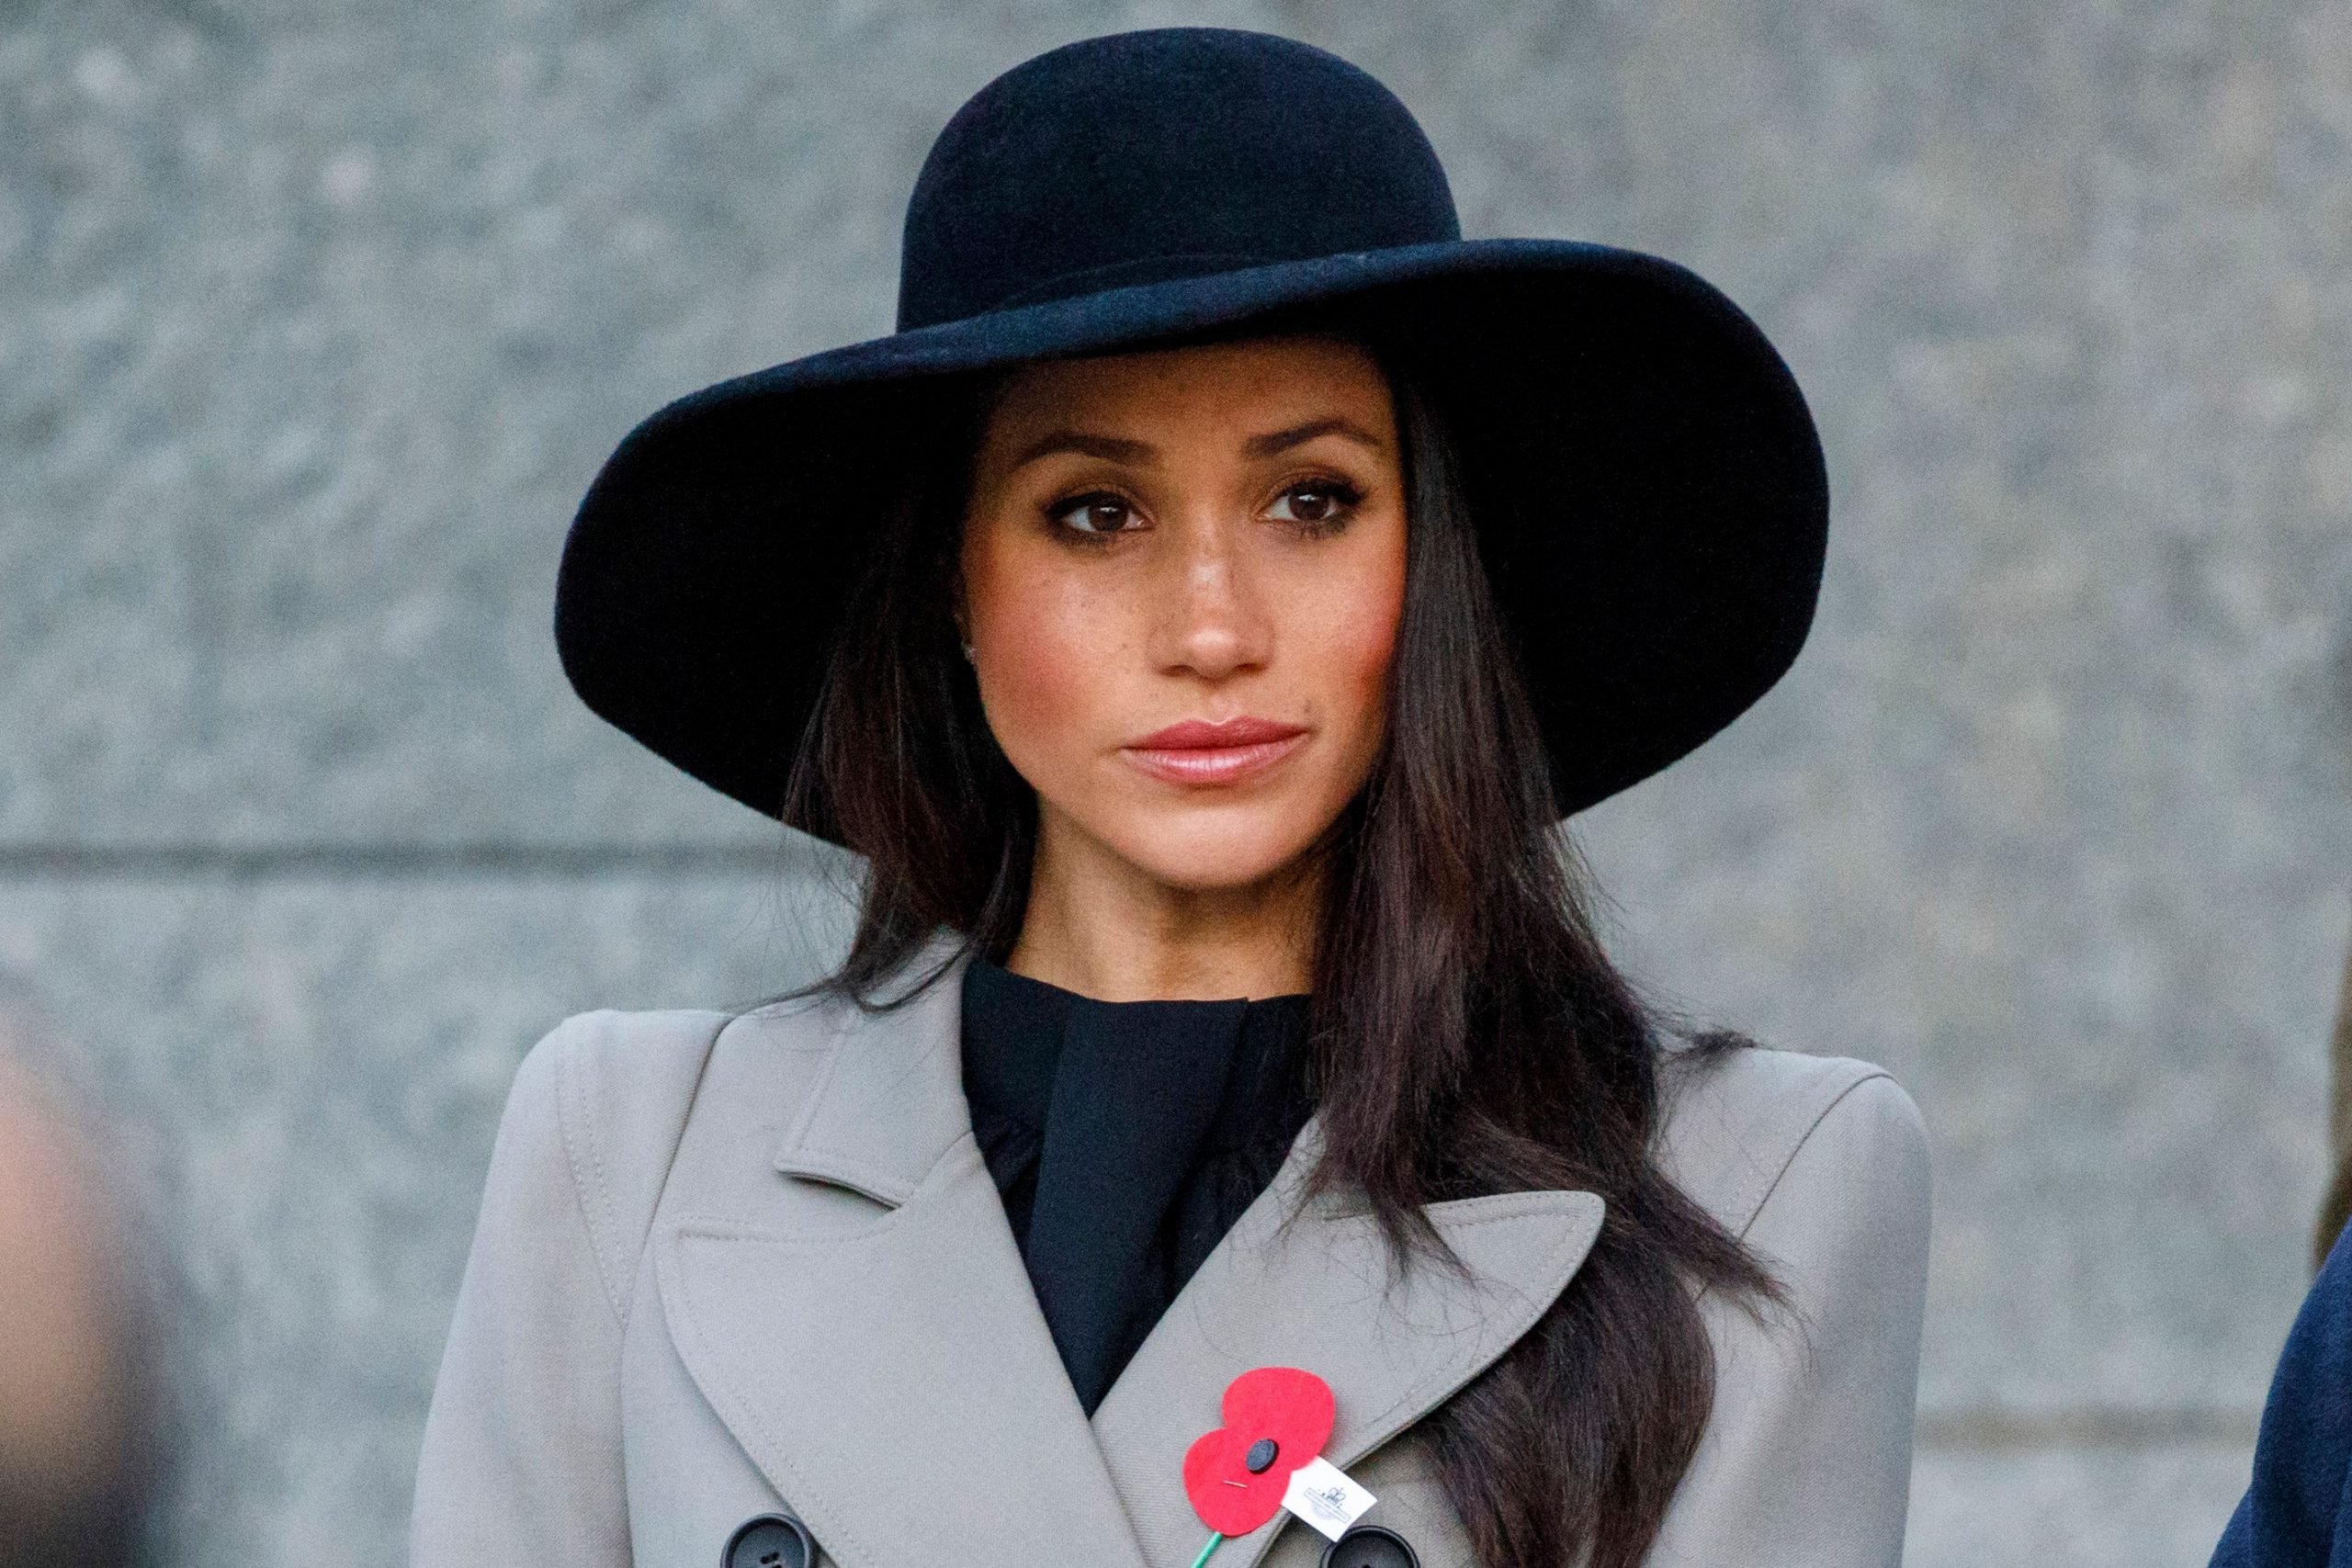 Meghan Markle looks on wearing a gray coat and black hat